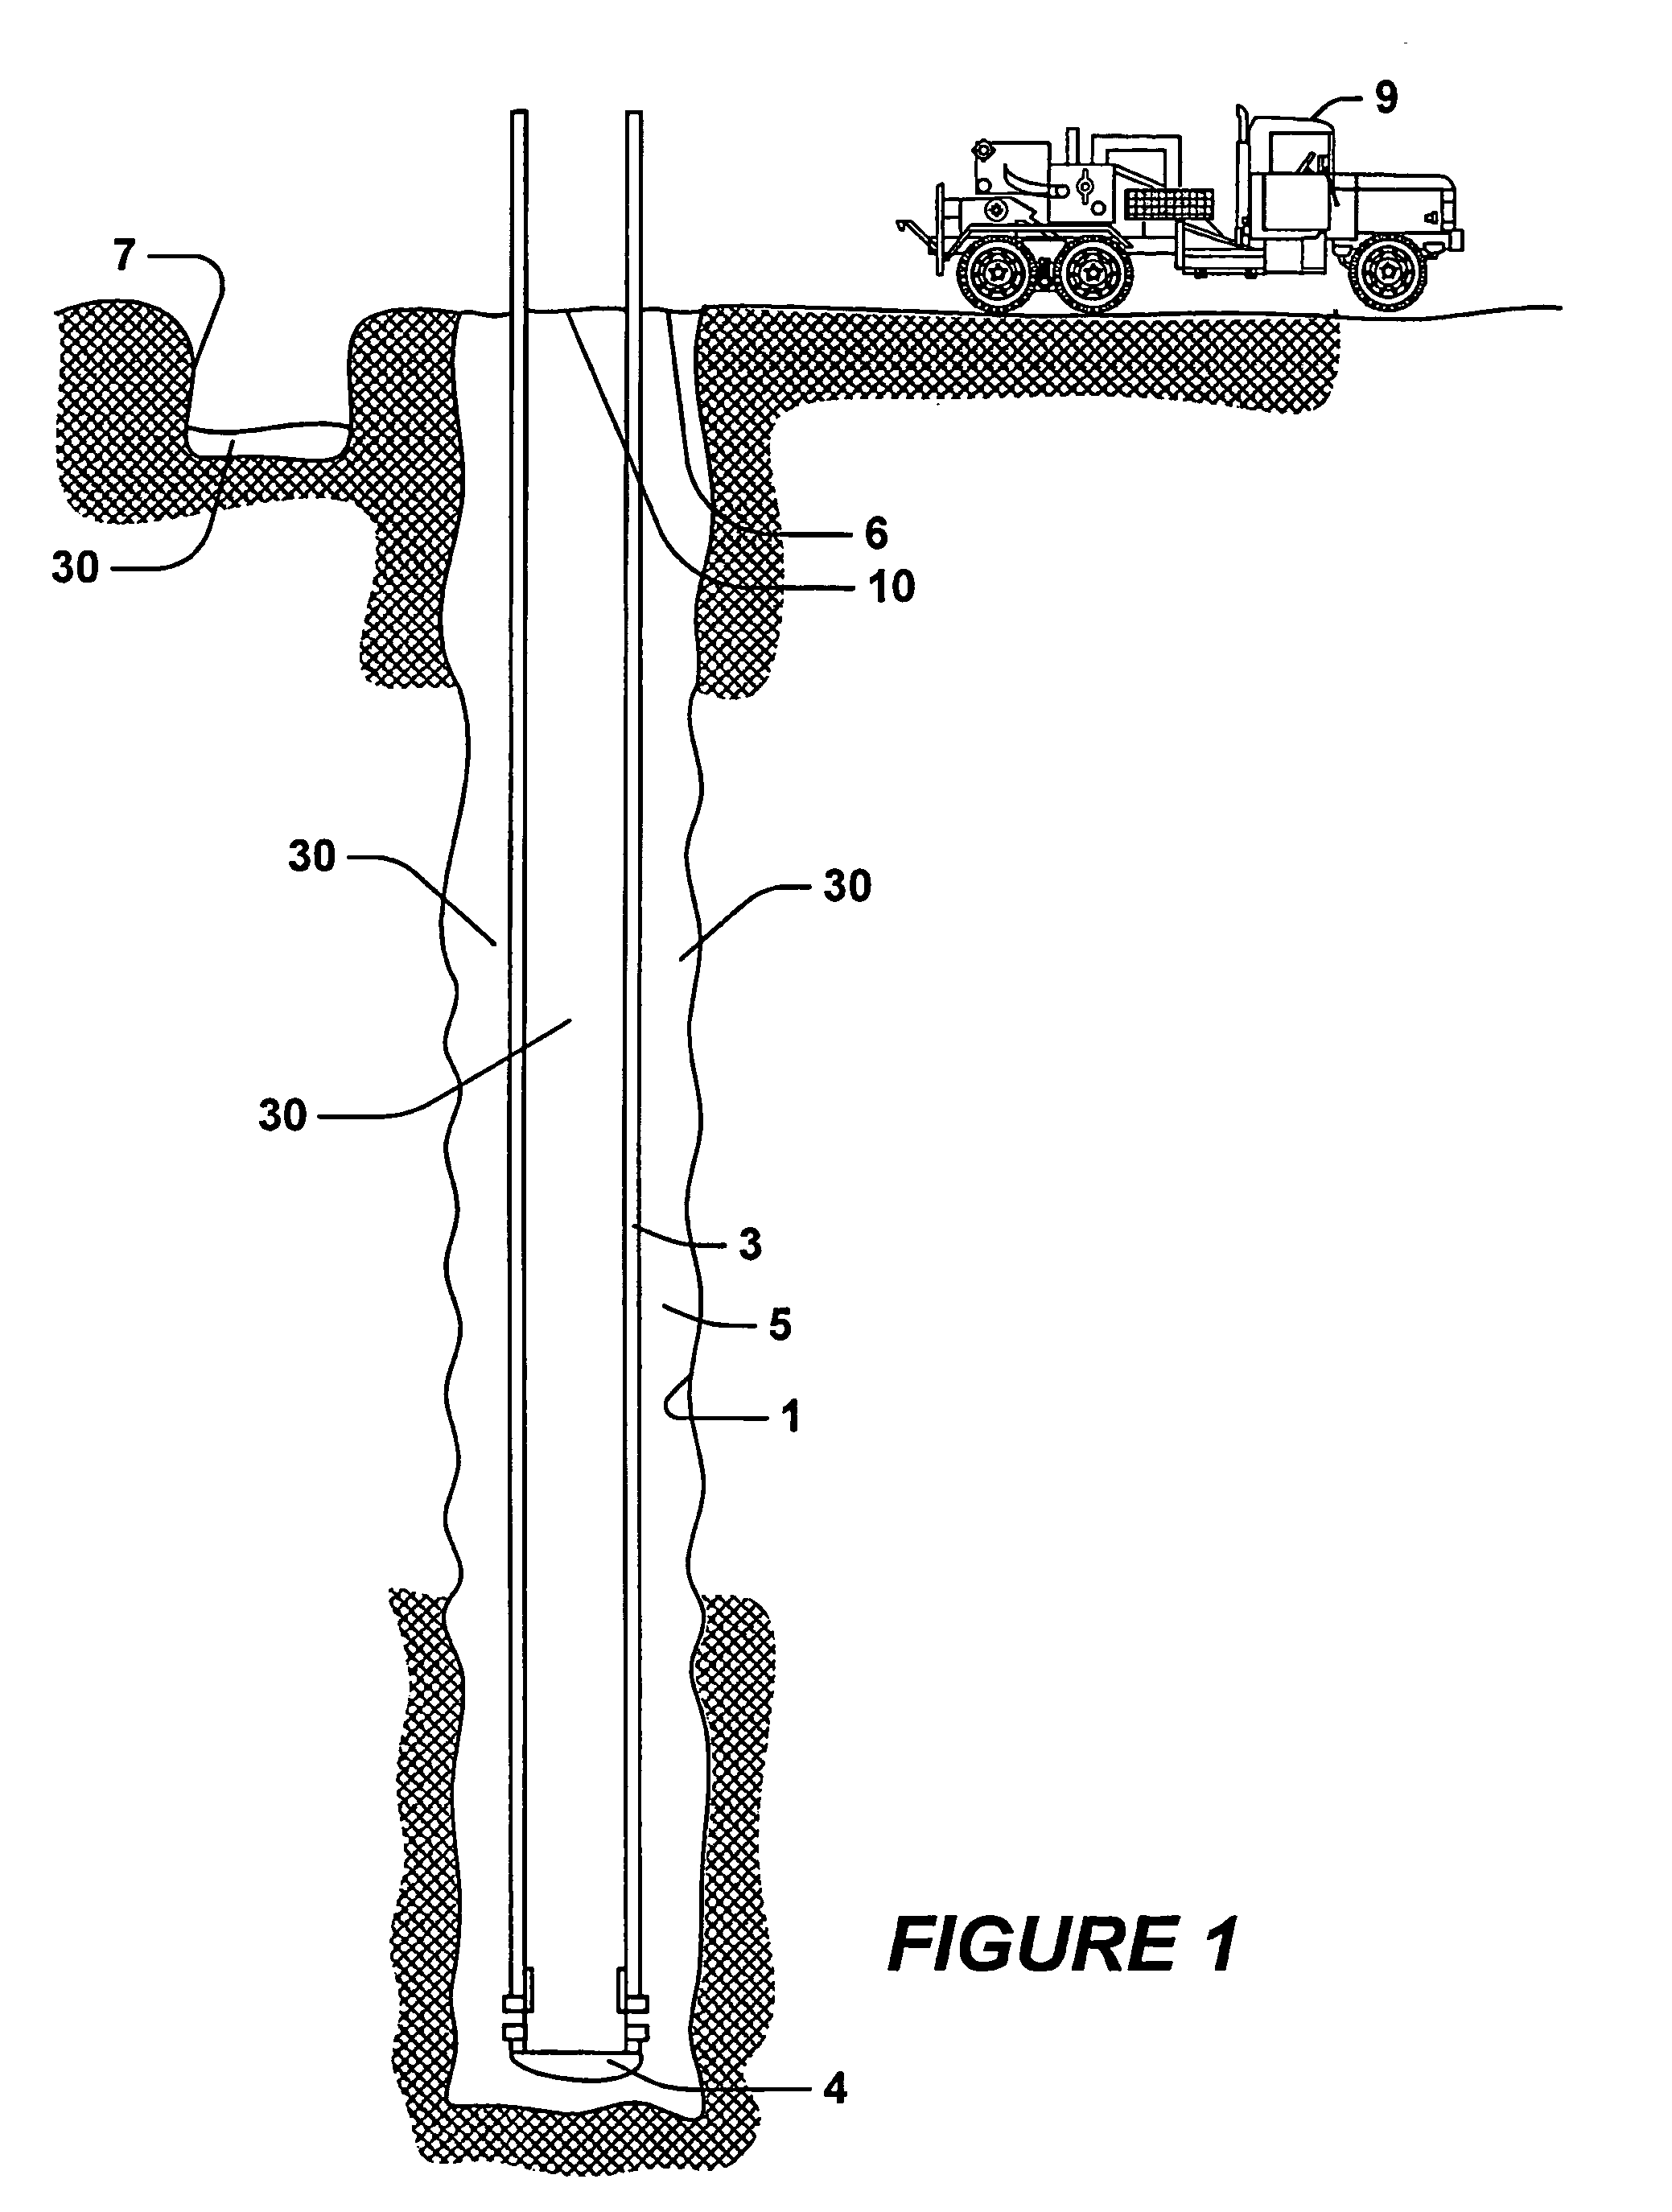 Methods and systems for reverse-circulation cementing in subterranean formations